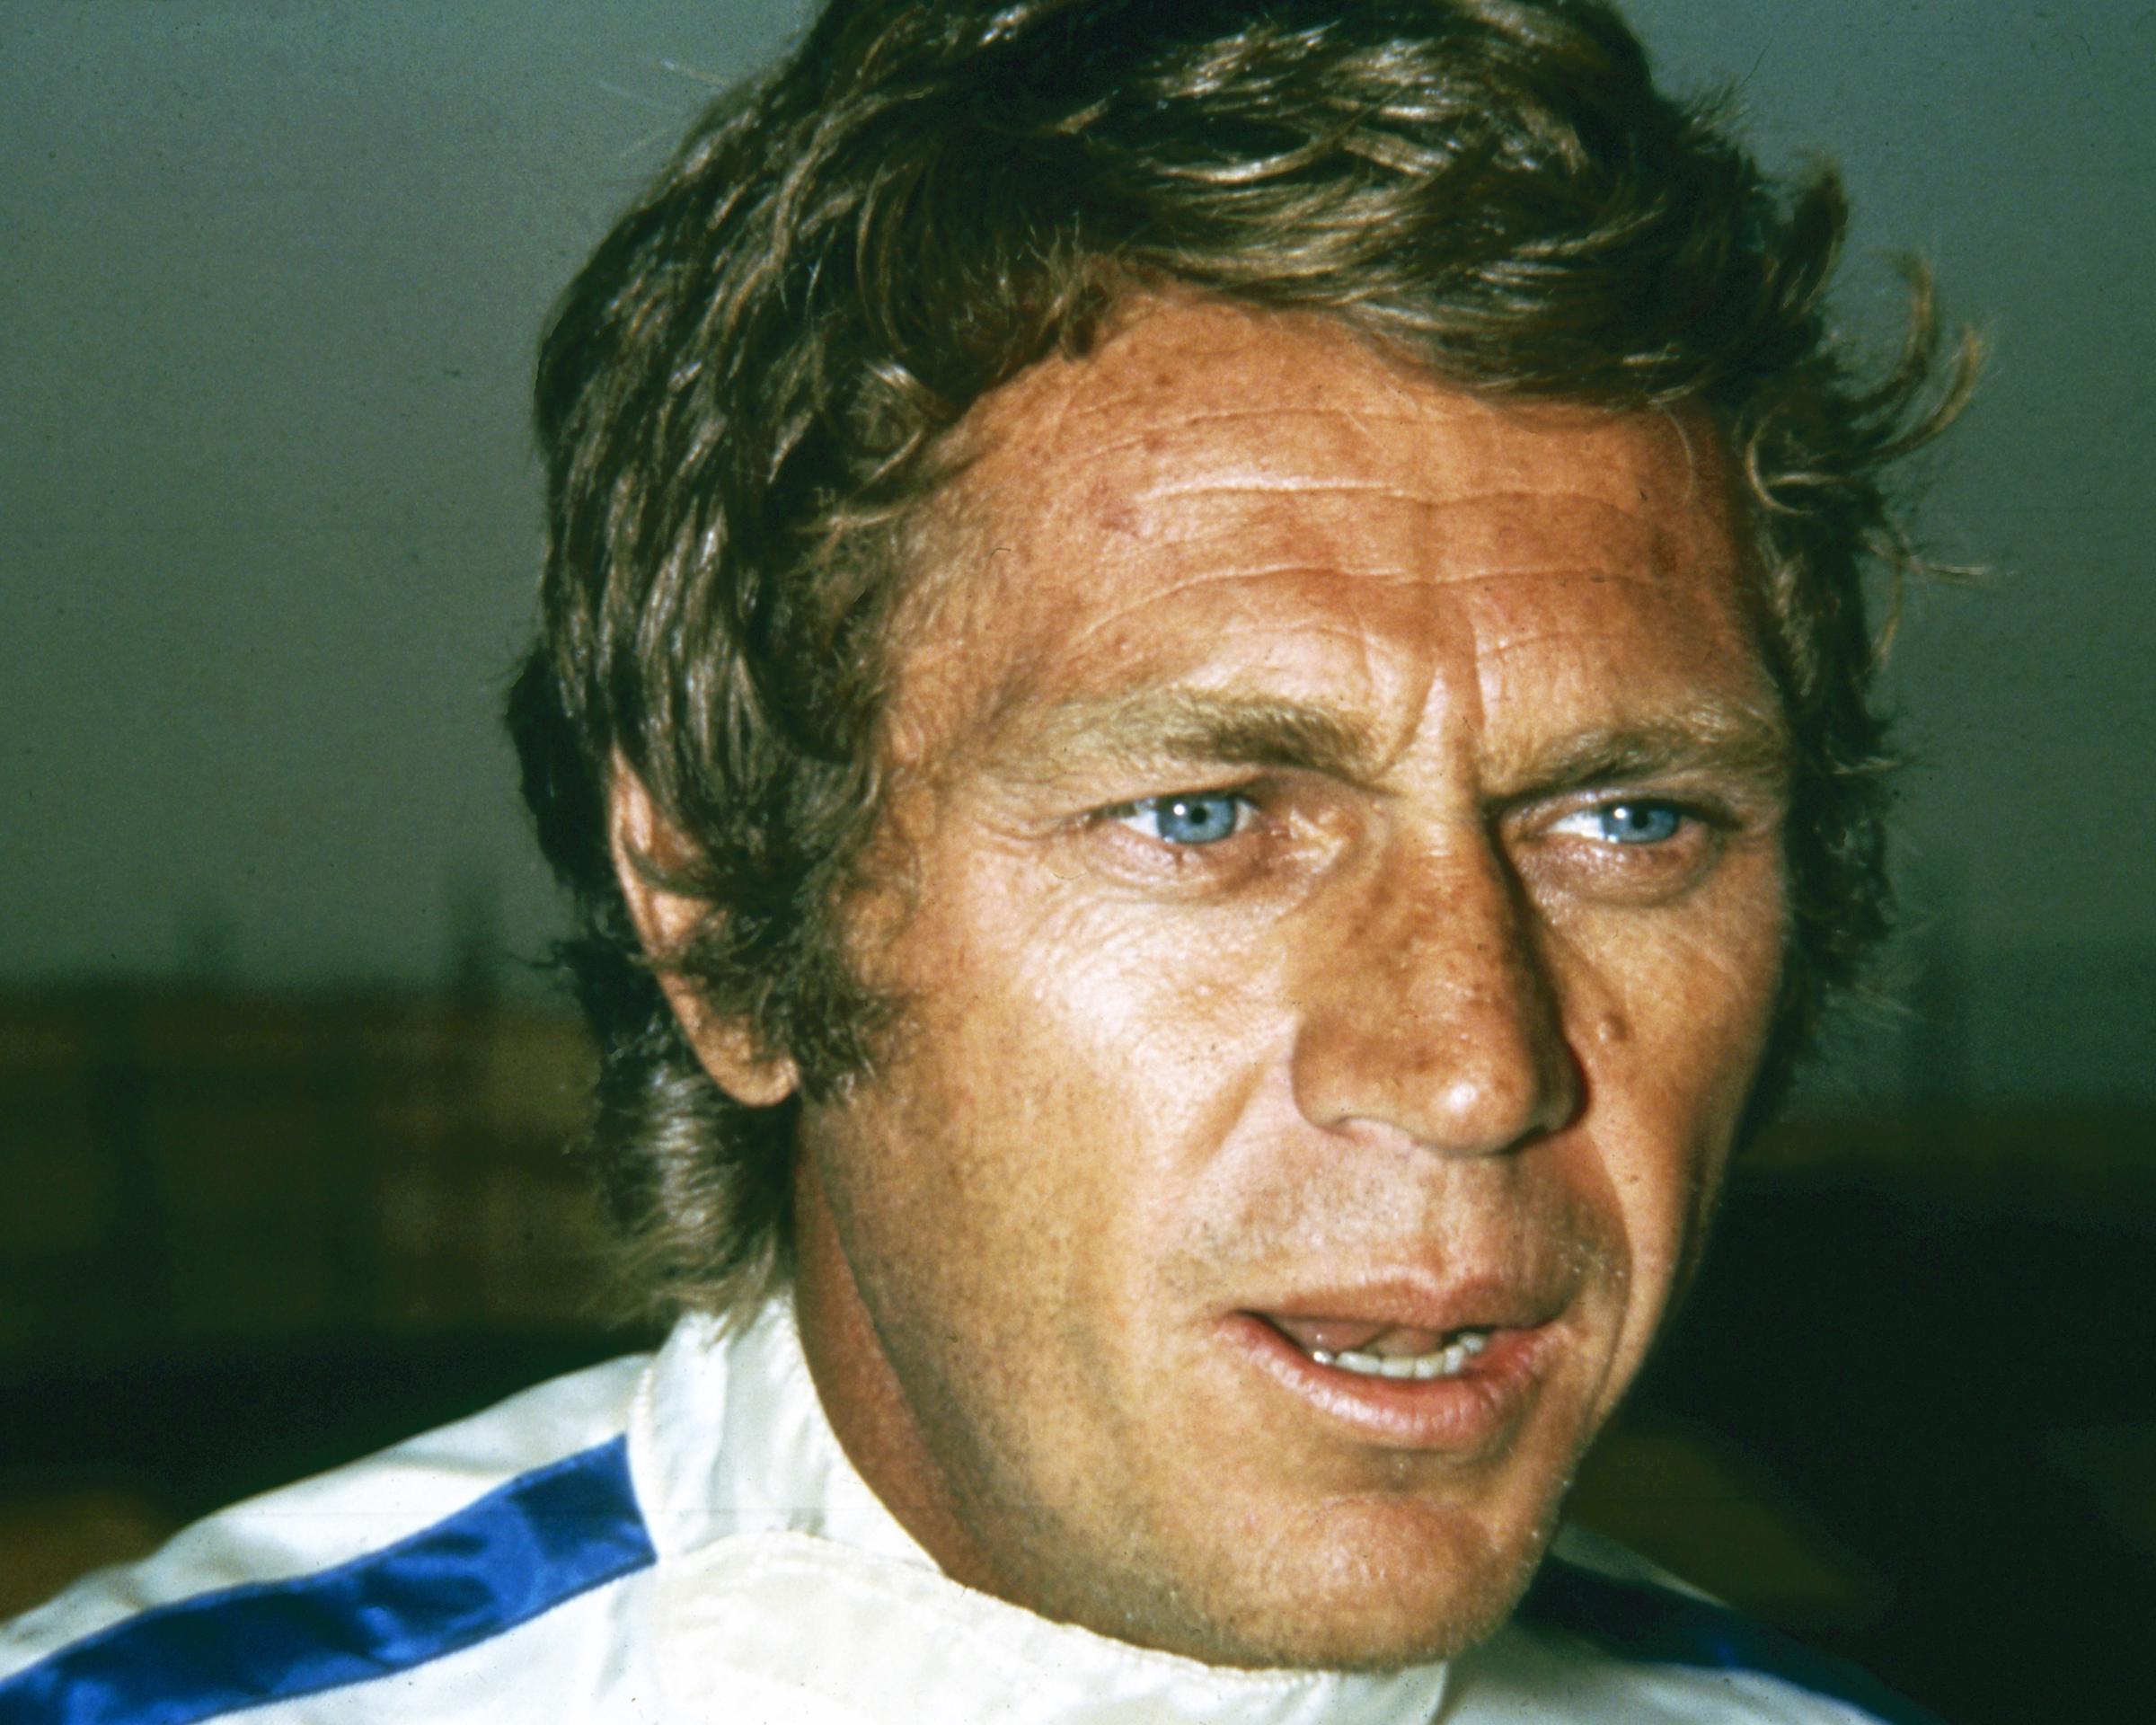 Steve McQueen circa 1971 | Source : Getty Images